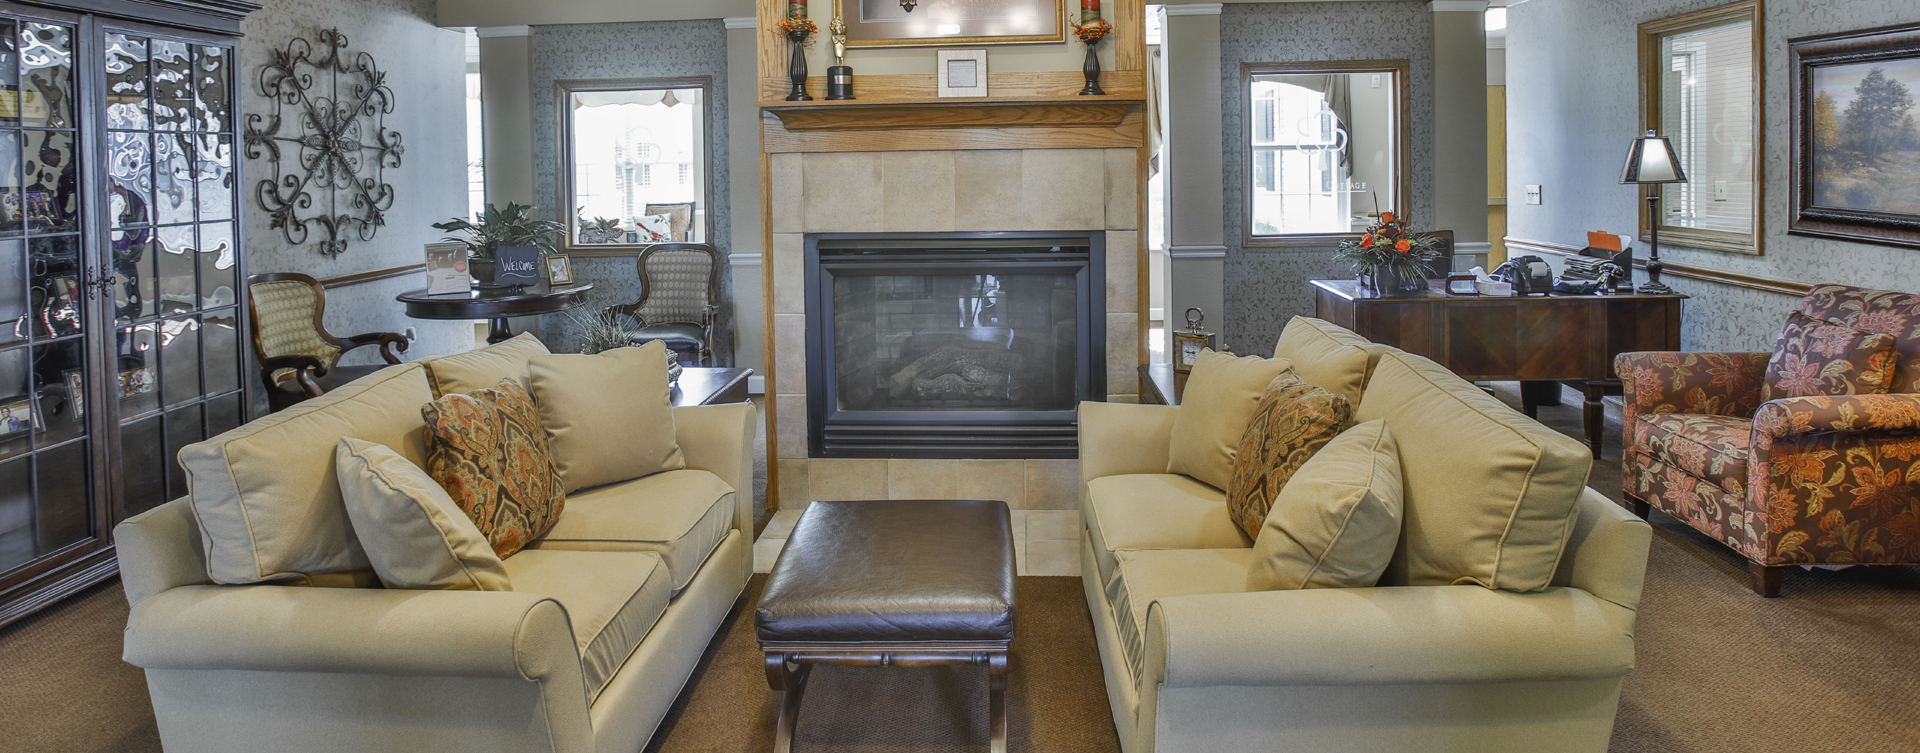 Residents can enjoy furniture covered in cozy fabrics in the Mary B’s living room at Bickford of Peoria